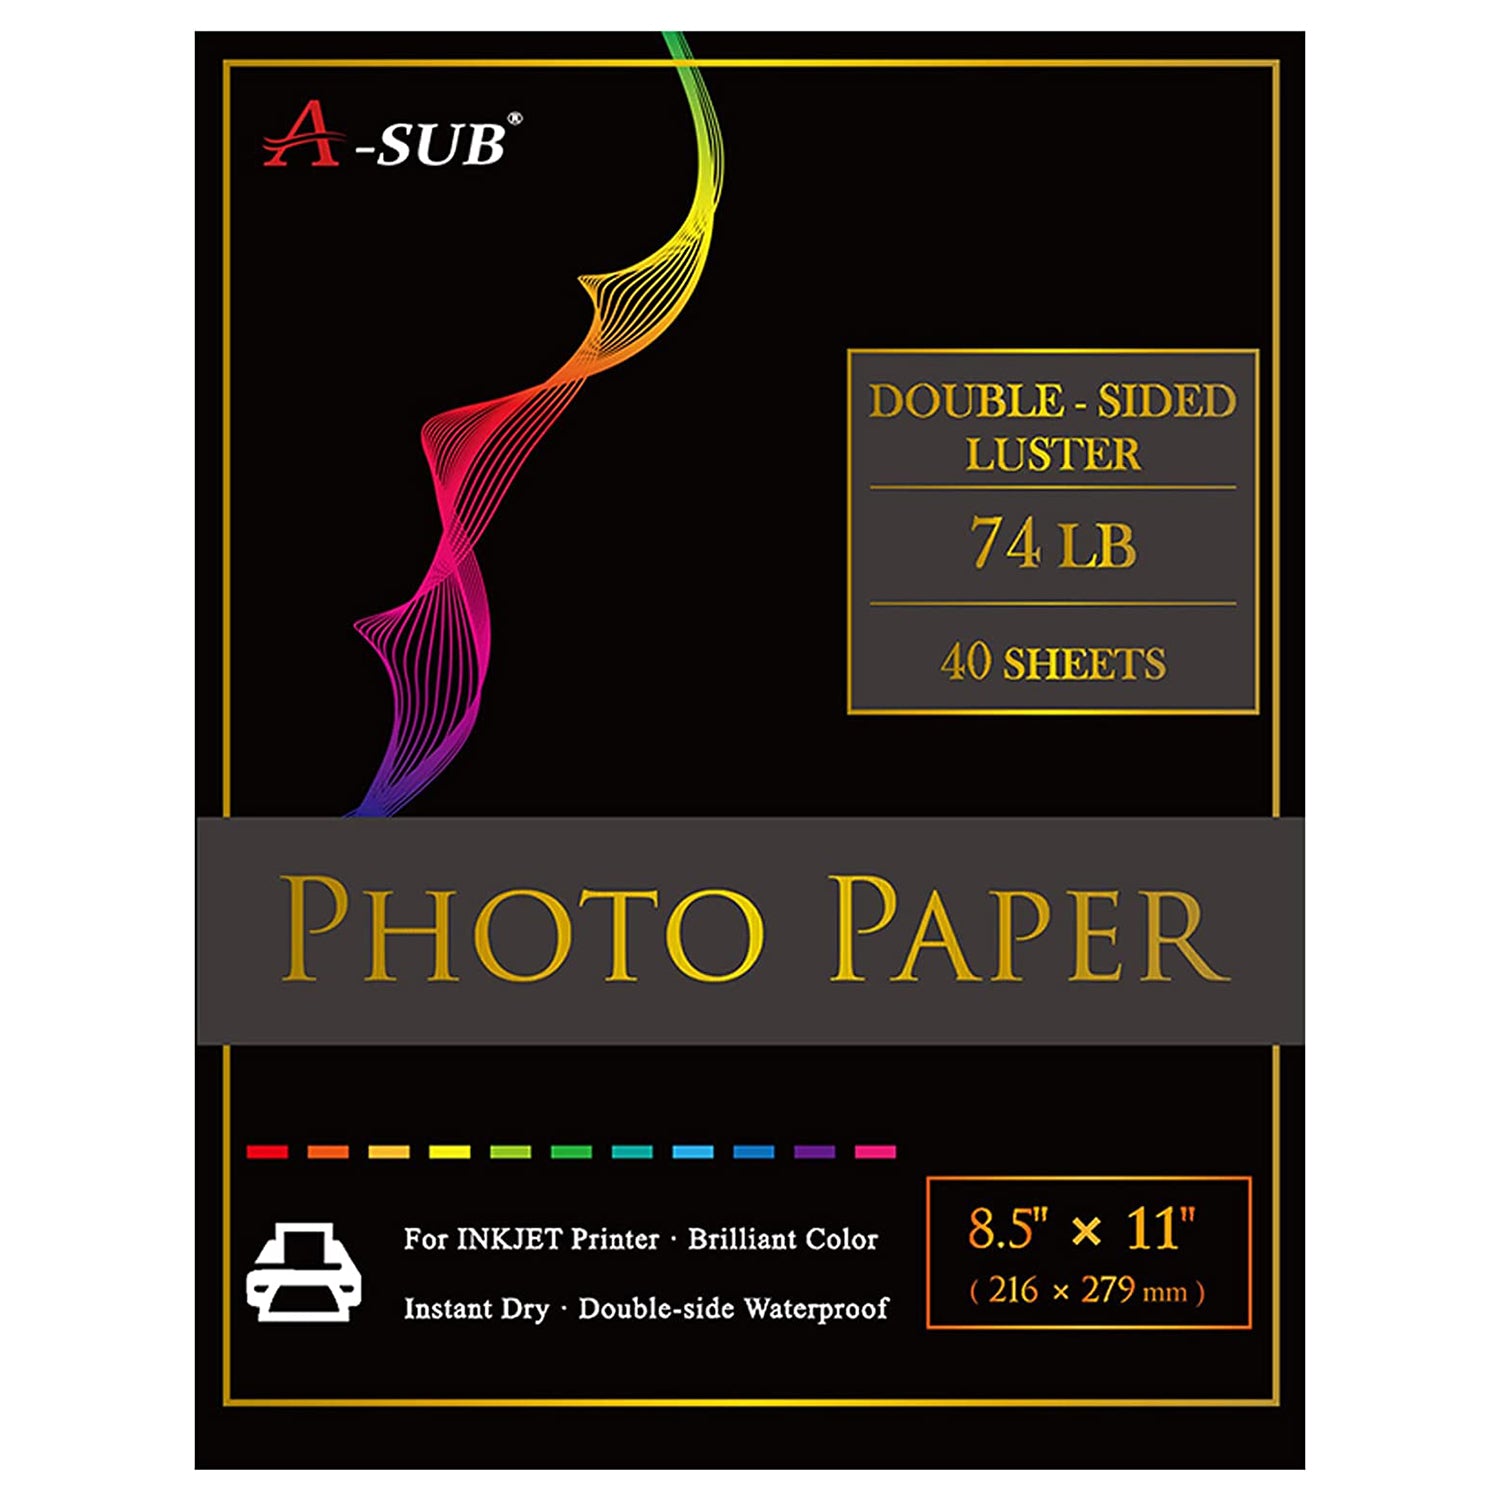 A-SUB Waterproof Clear Sticker Paper for Inkjet Printers 8.5x11 in 15 Sheets